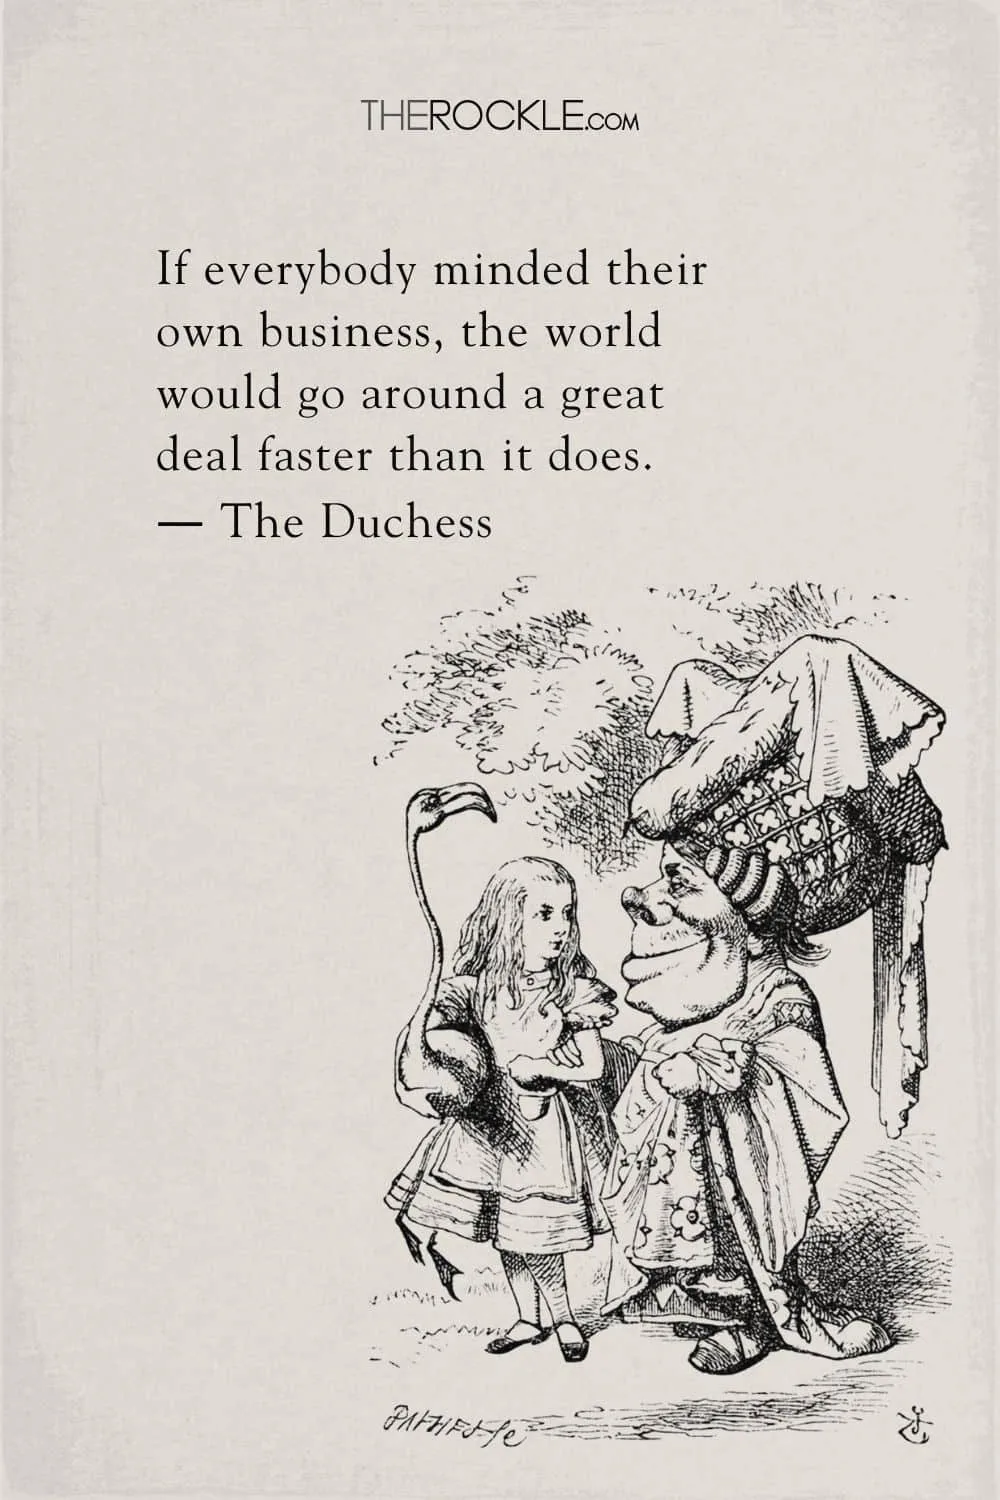 Alice in Wonderland book quote on minding your own business